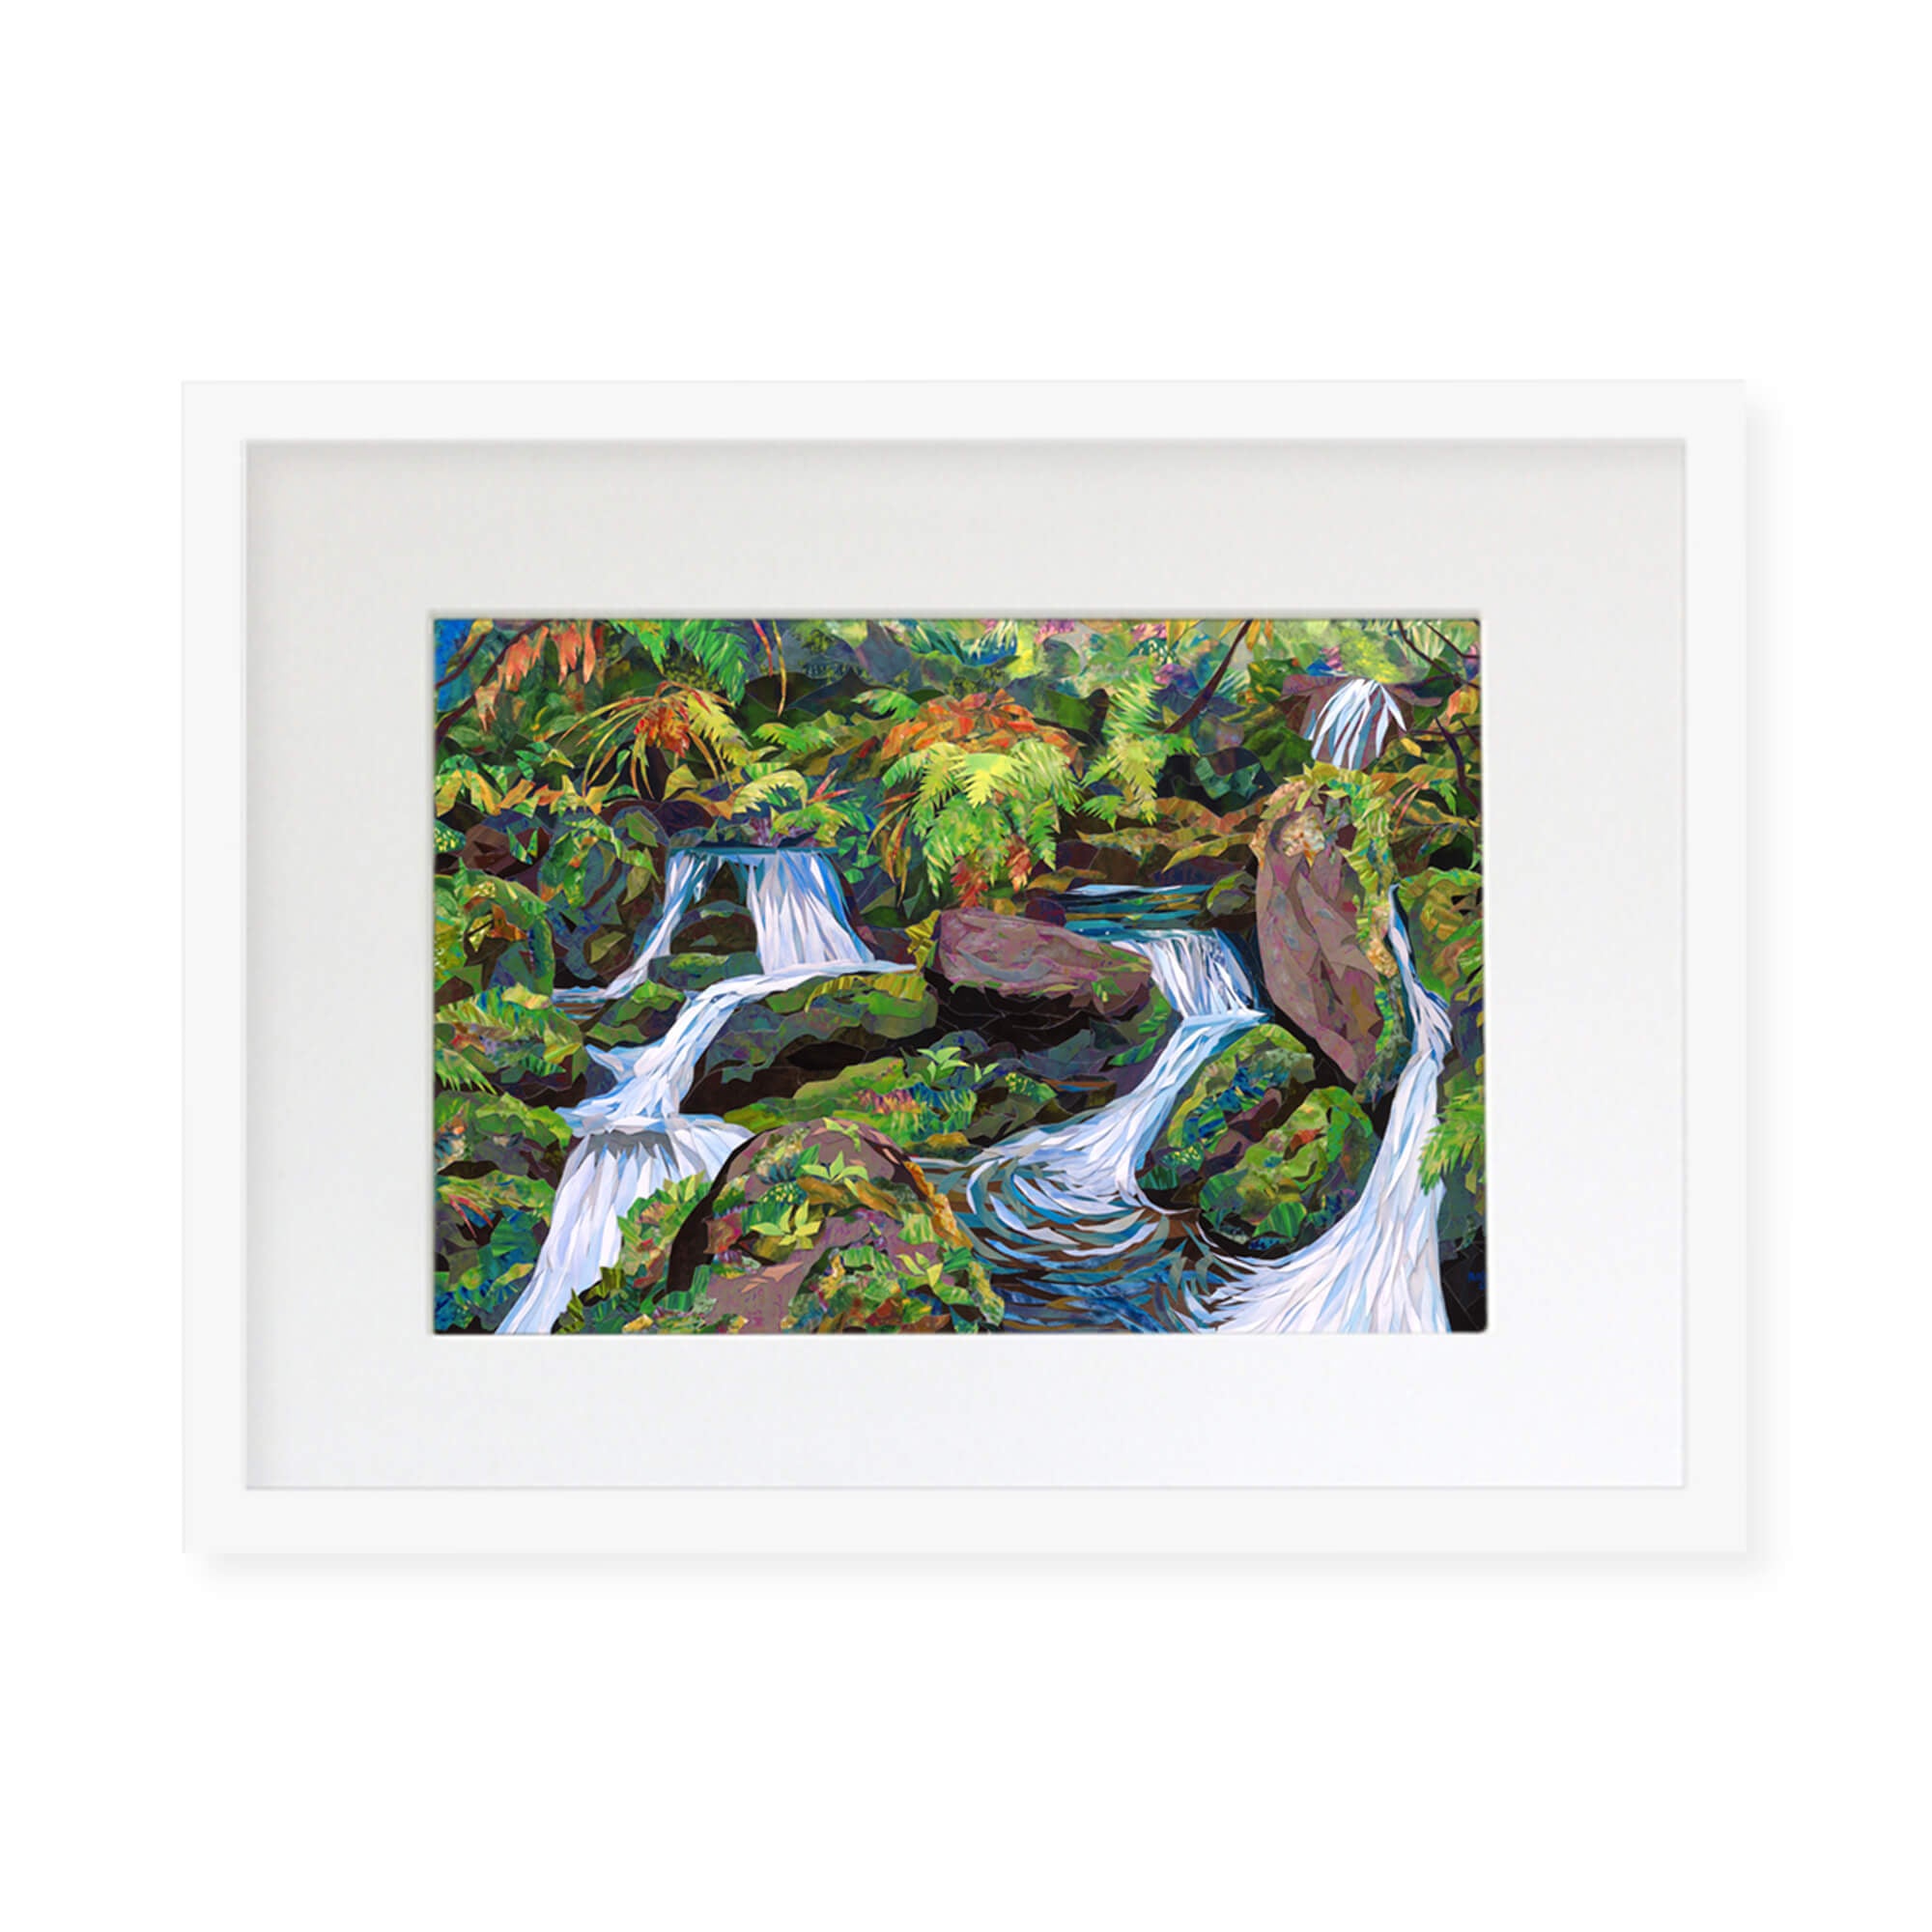 A framed matted art print featuring a collage of colorful streams of water surrounded by tropical plants by Hawaii artist Patrick Parker